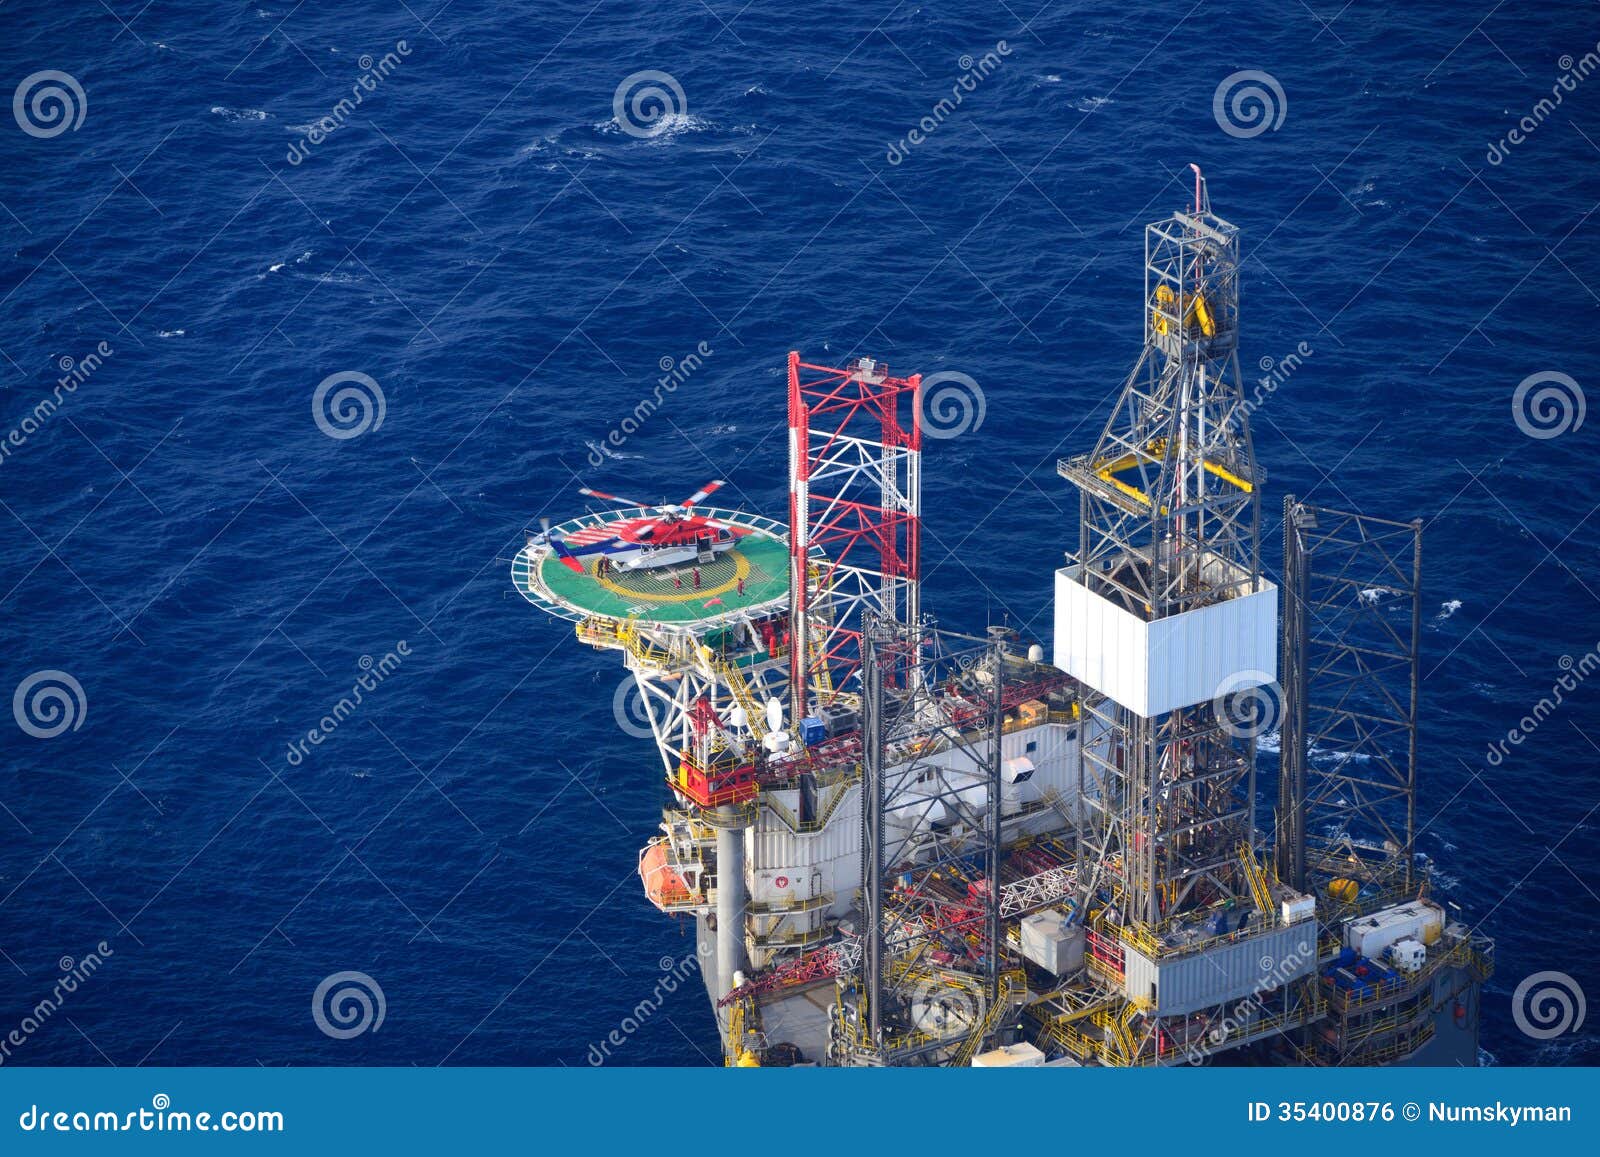 helicopter embark passenger on the offshore oil rig.